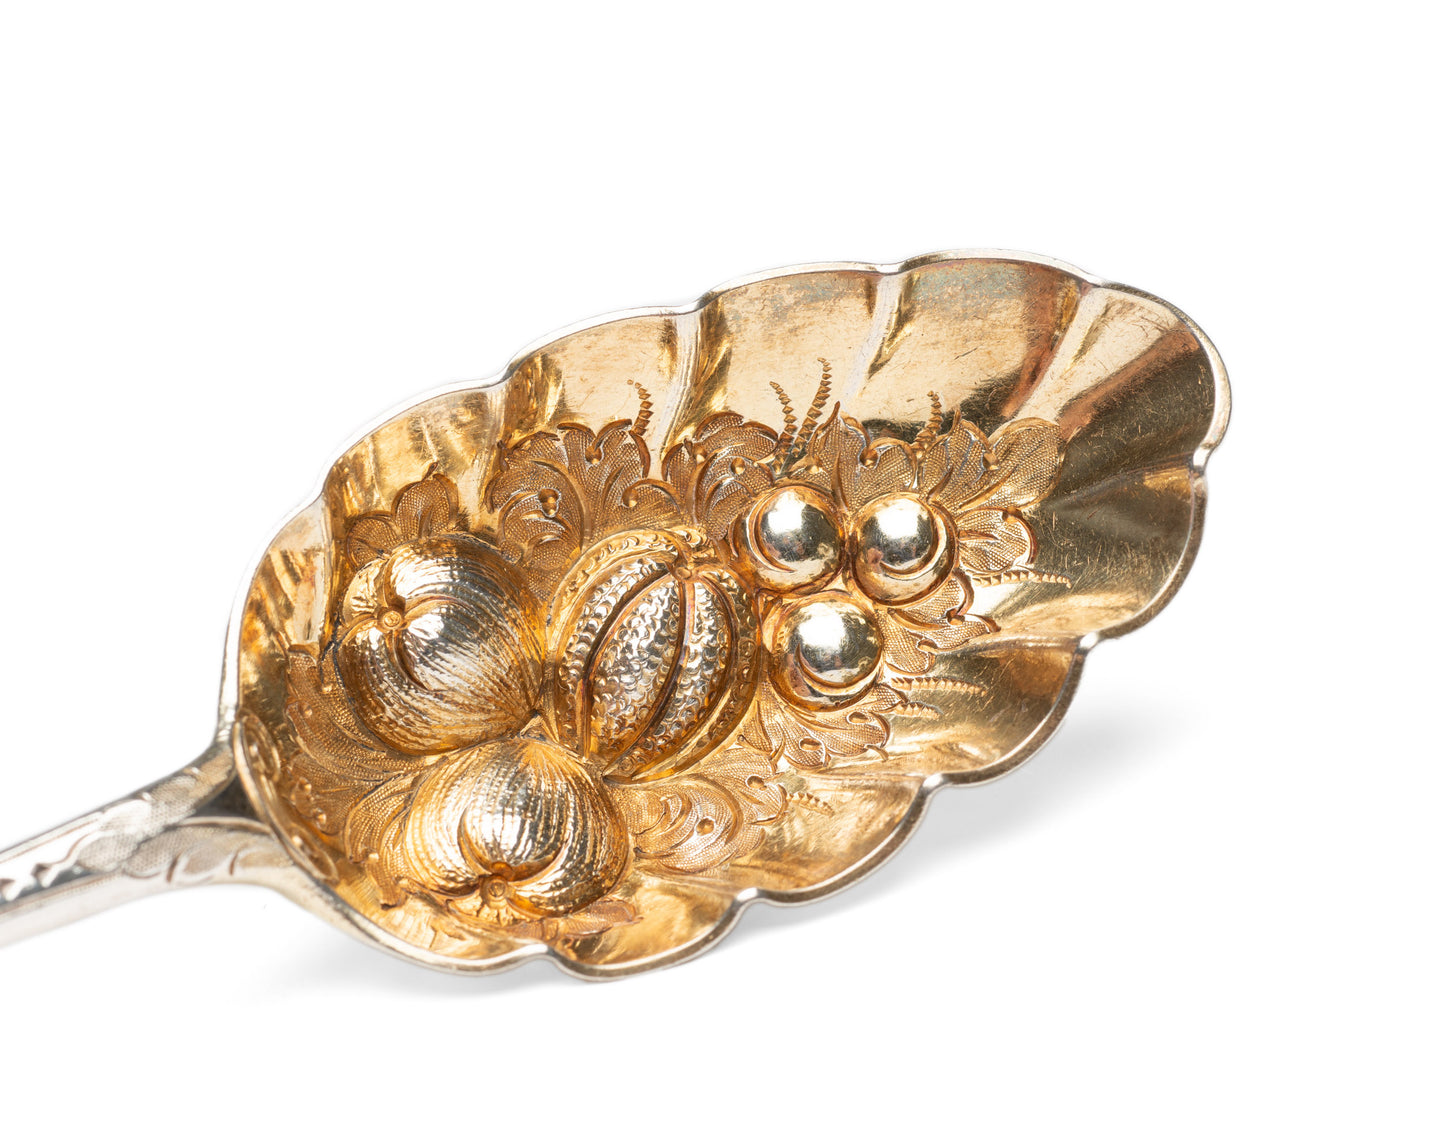 Antique Georgian Hallmarked Silver Gilt Berry Spoon by George Smith II of London (Code 2194)